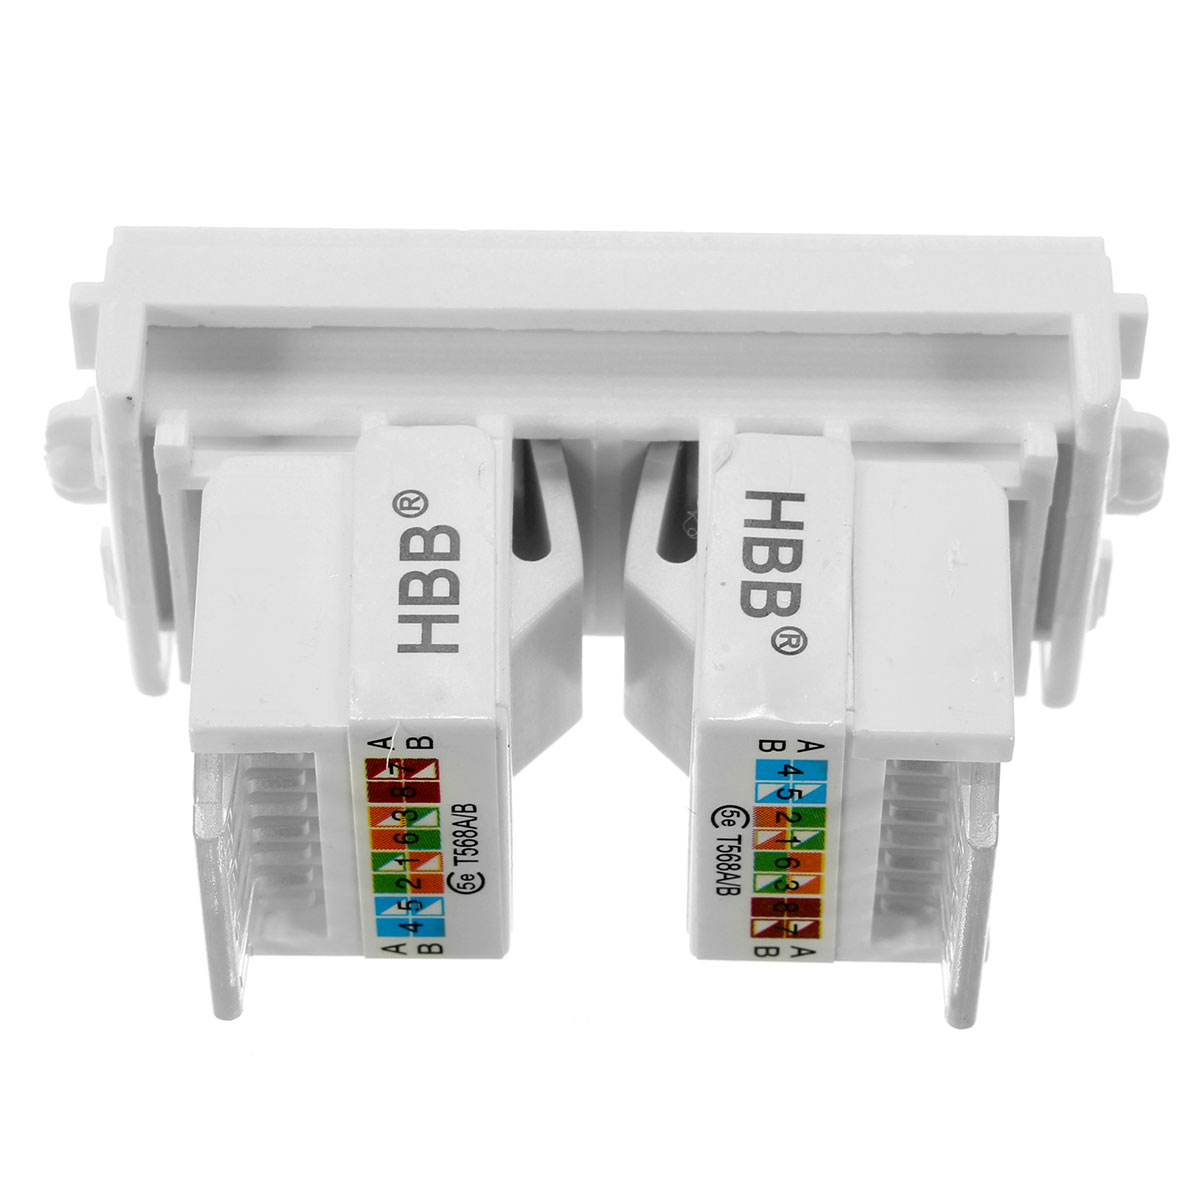 RJ45-Wall-Plate-Dual-Port-Socket-Panel-Building-Materials-Network-Combination-Connector-Module-1401148-5